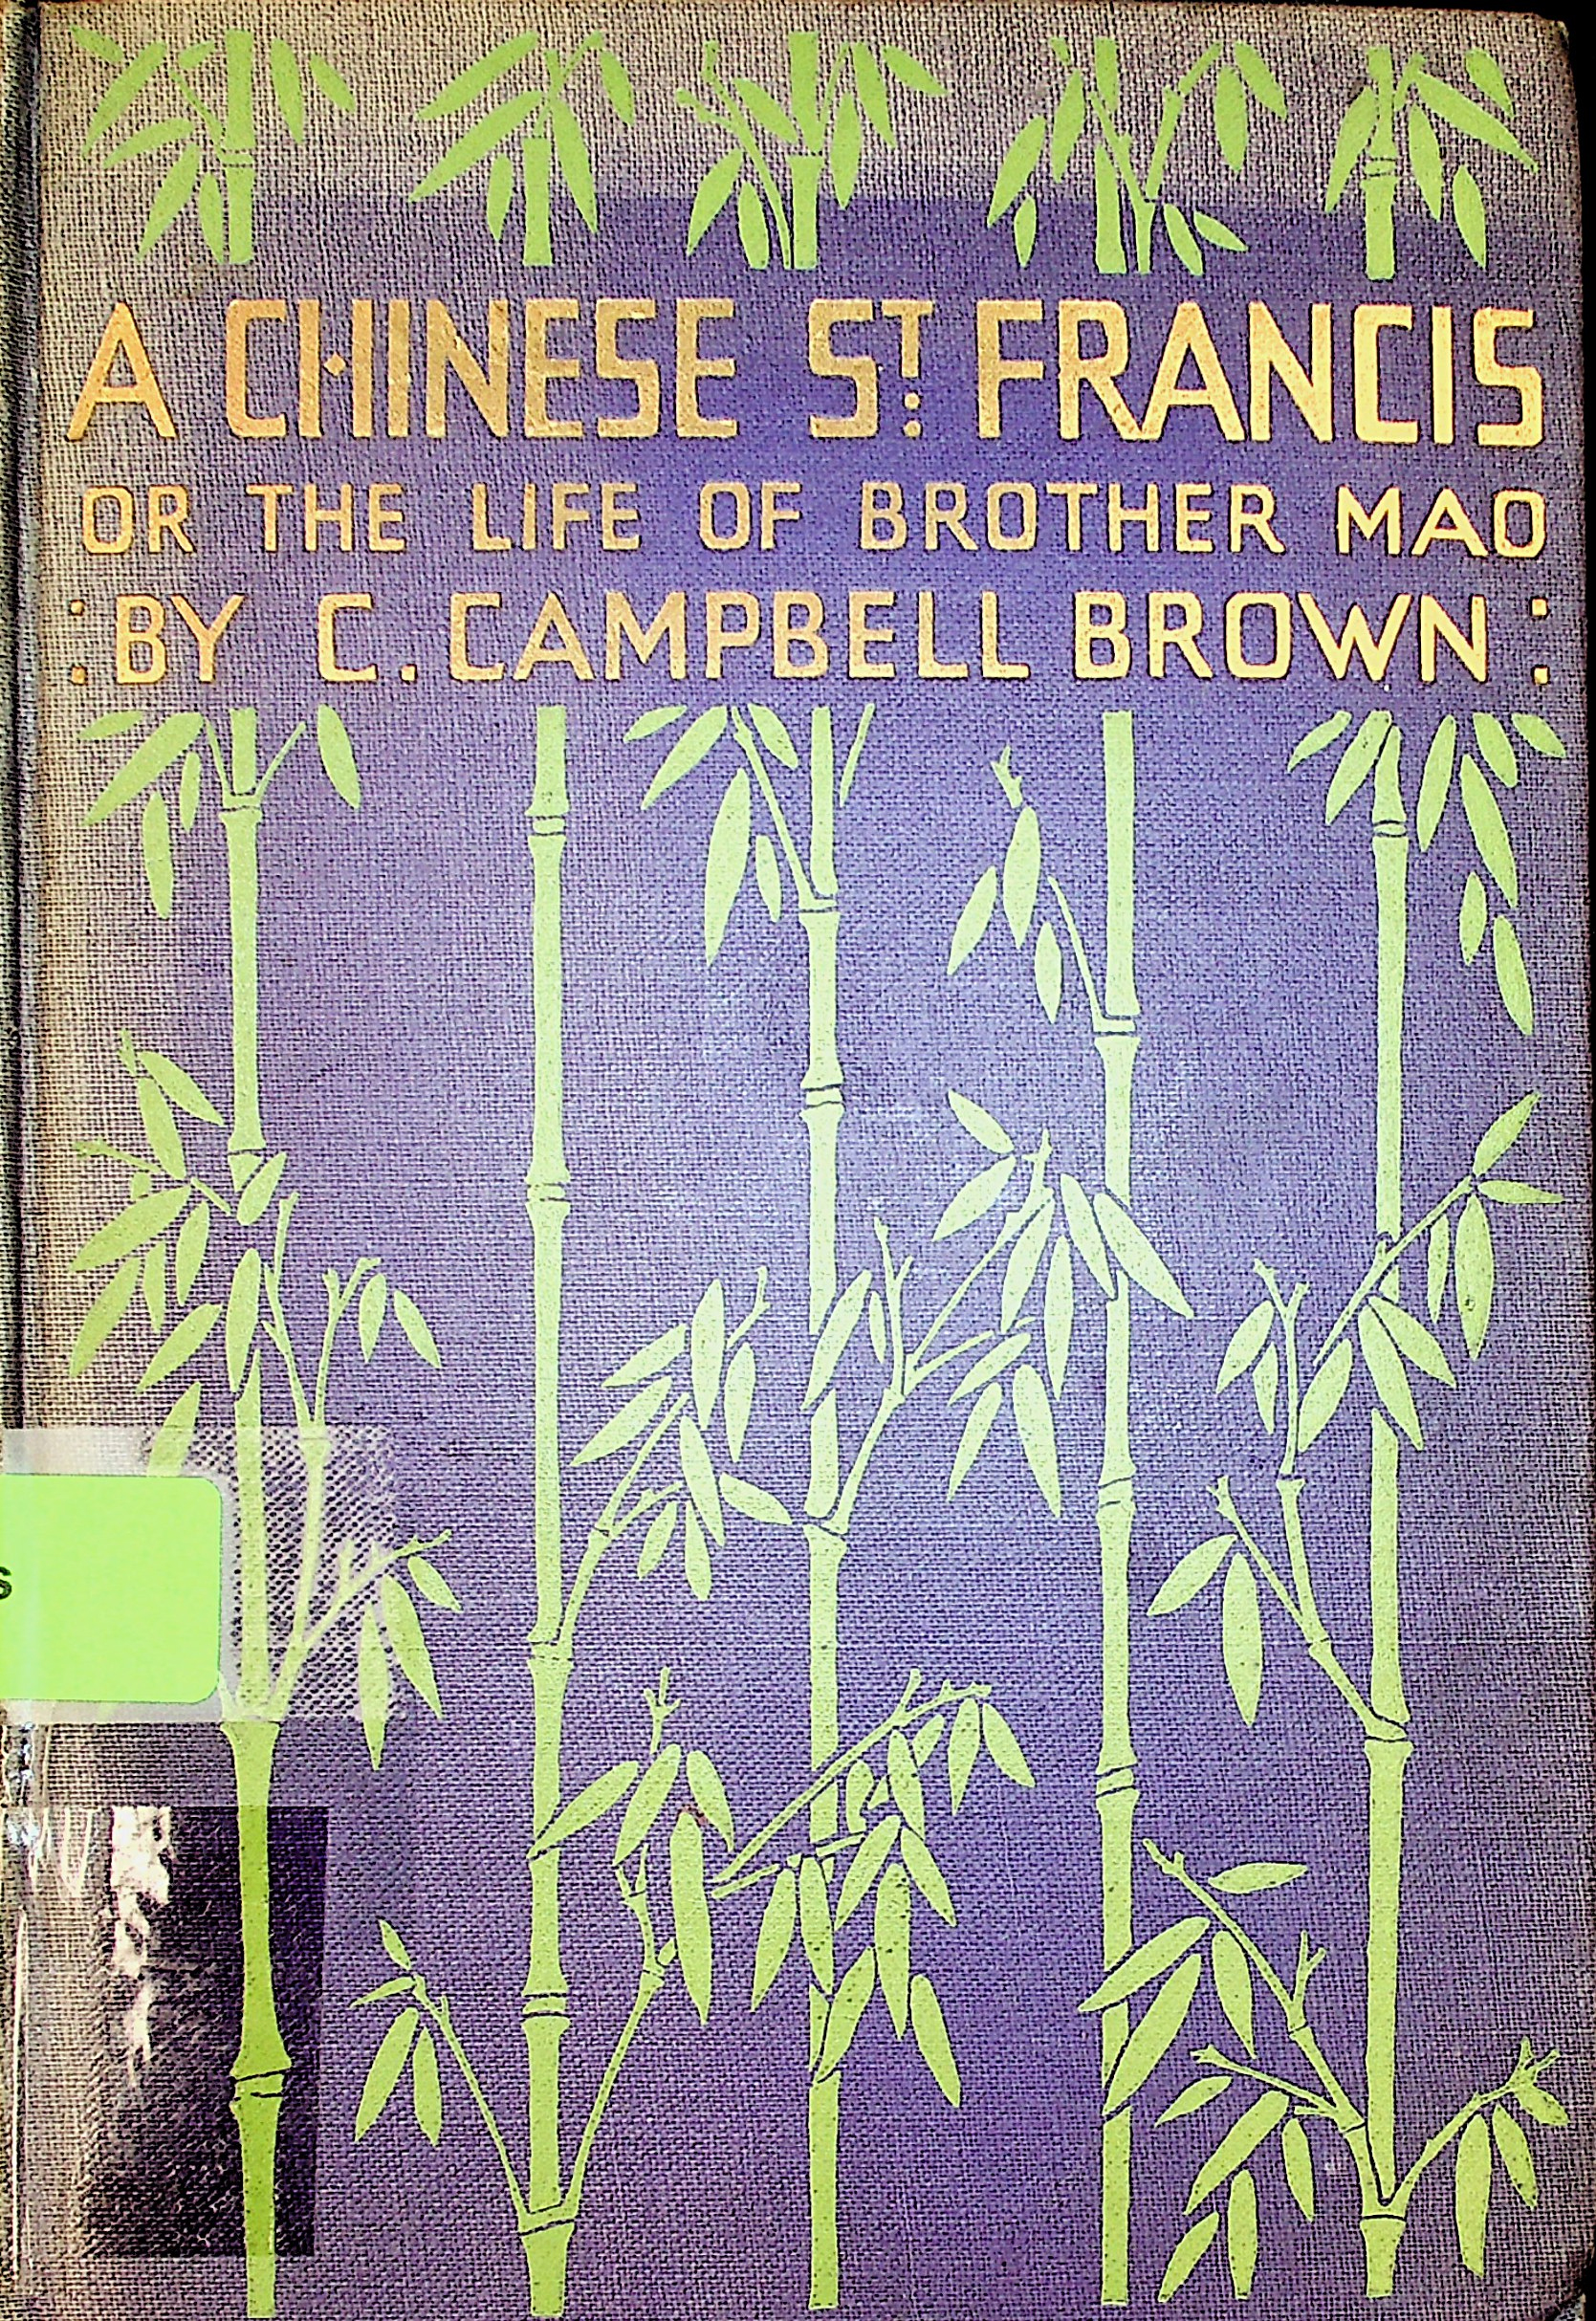 A Chinese St. Francis : or the life of Brother Mao 